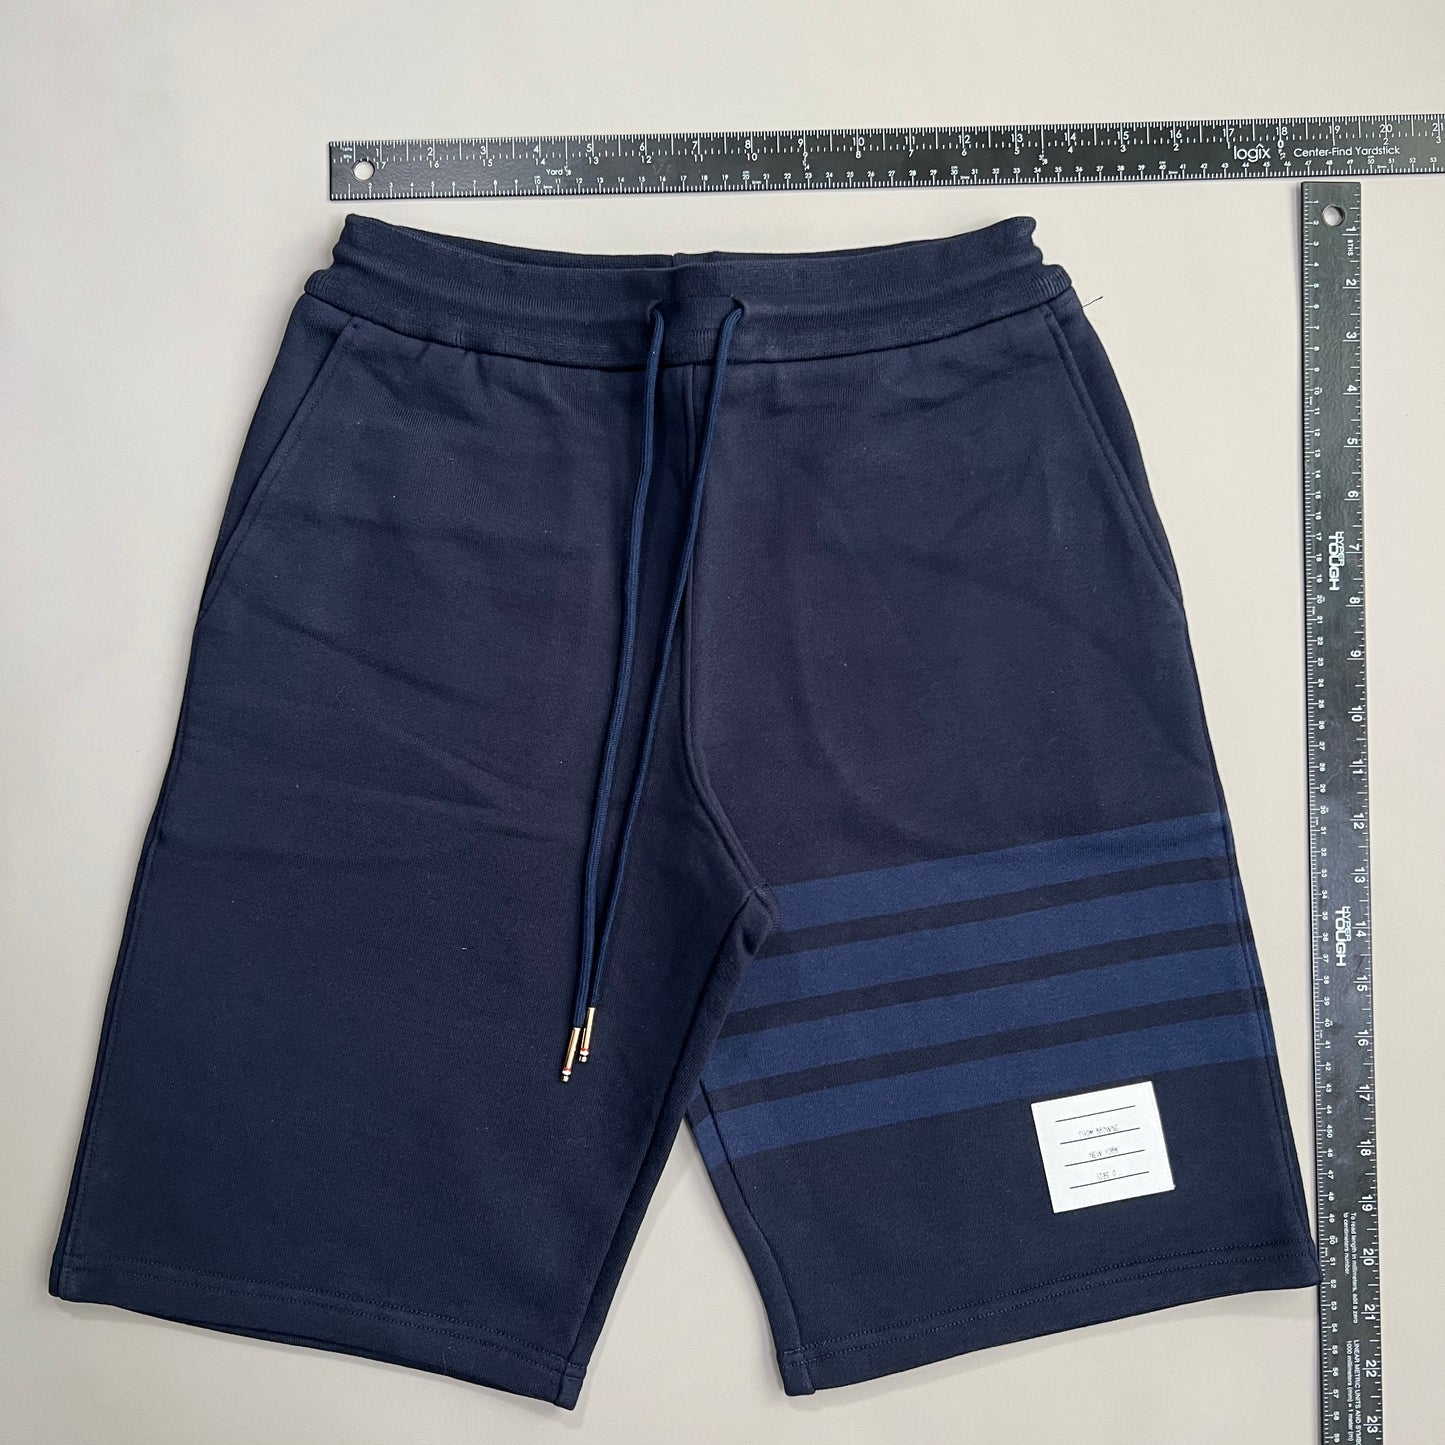 THOM BROWNE Classic Sweat Shorts in Tonal 4 Bar Loop Back Navy Size 0 (New)